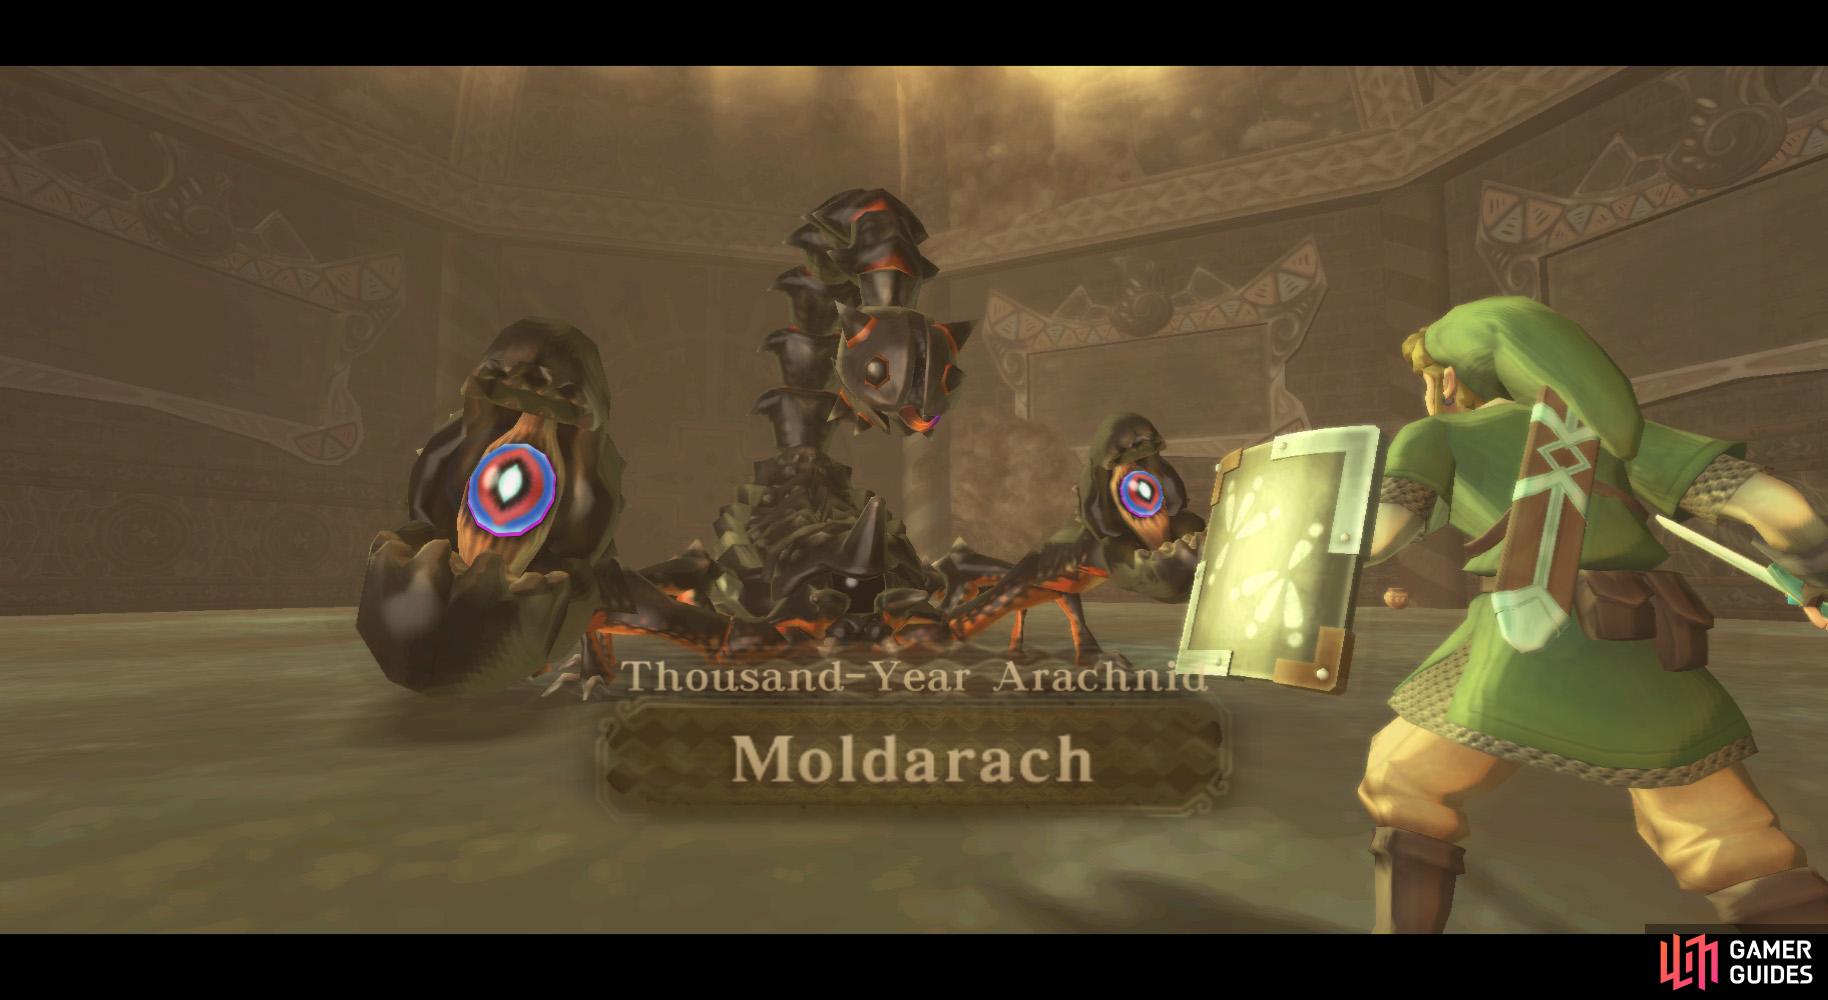 Moldarach looks menacing, but its fairly easy if played right.